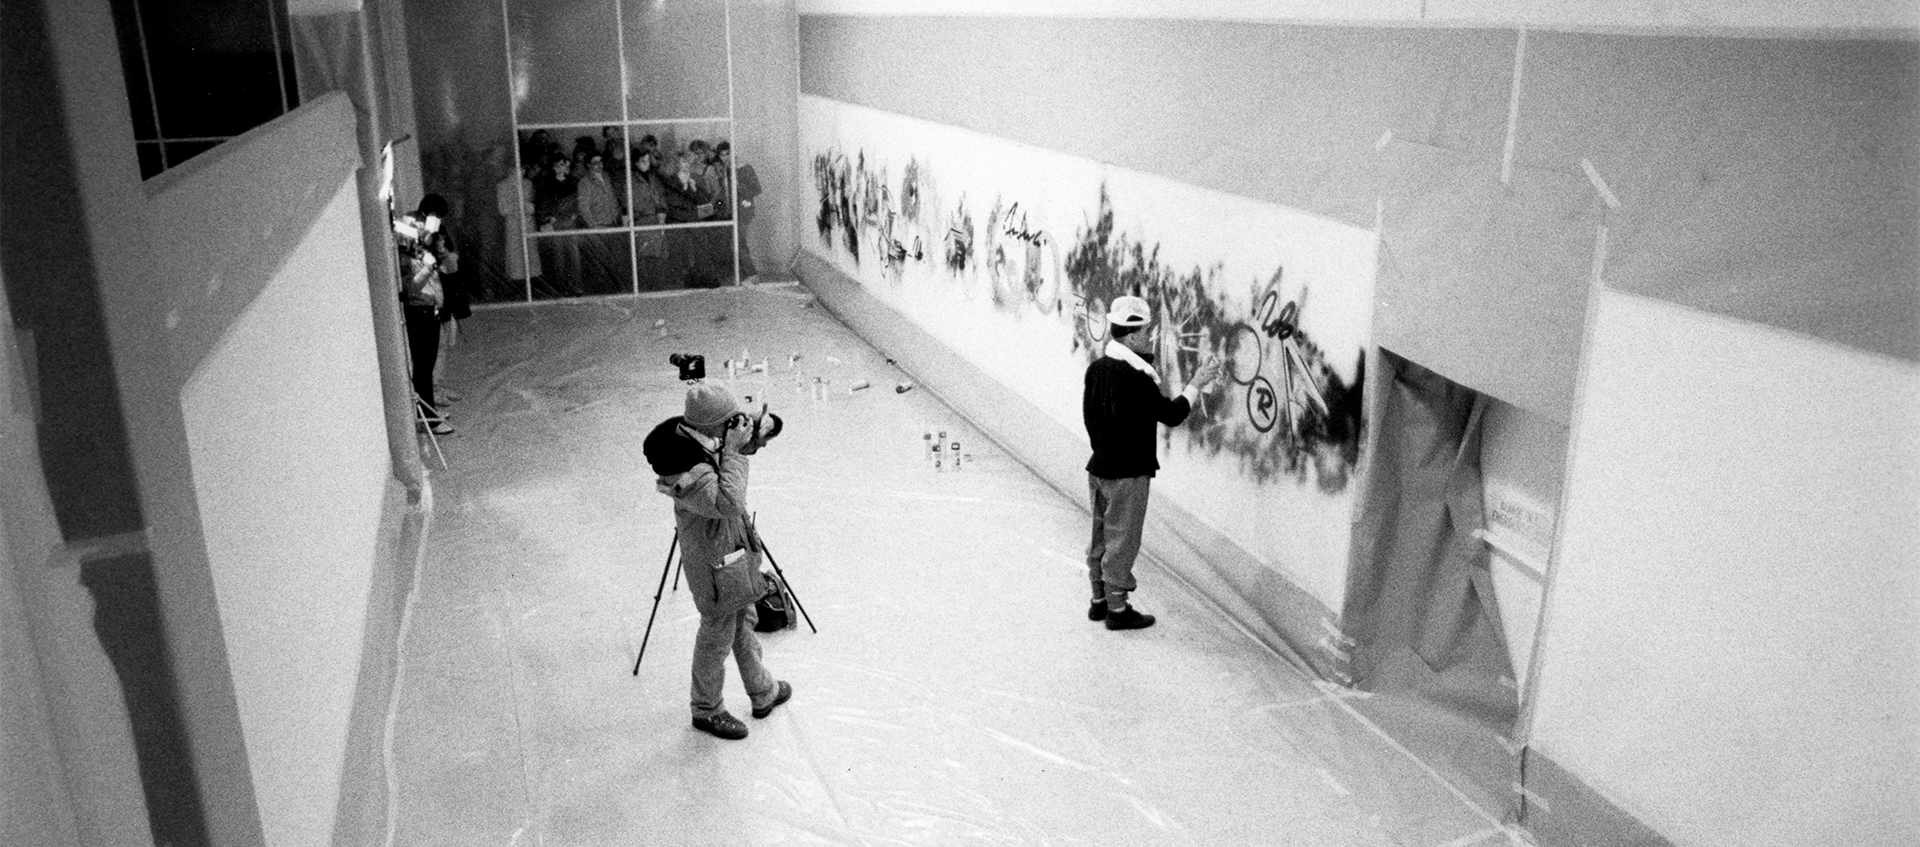 A black-and-white photo of artist Futura spray painting a long, wall-length work in a gallery lined in plastic film. Photographers film film from the center of the gallery and its doorway.